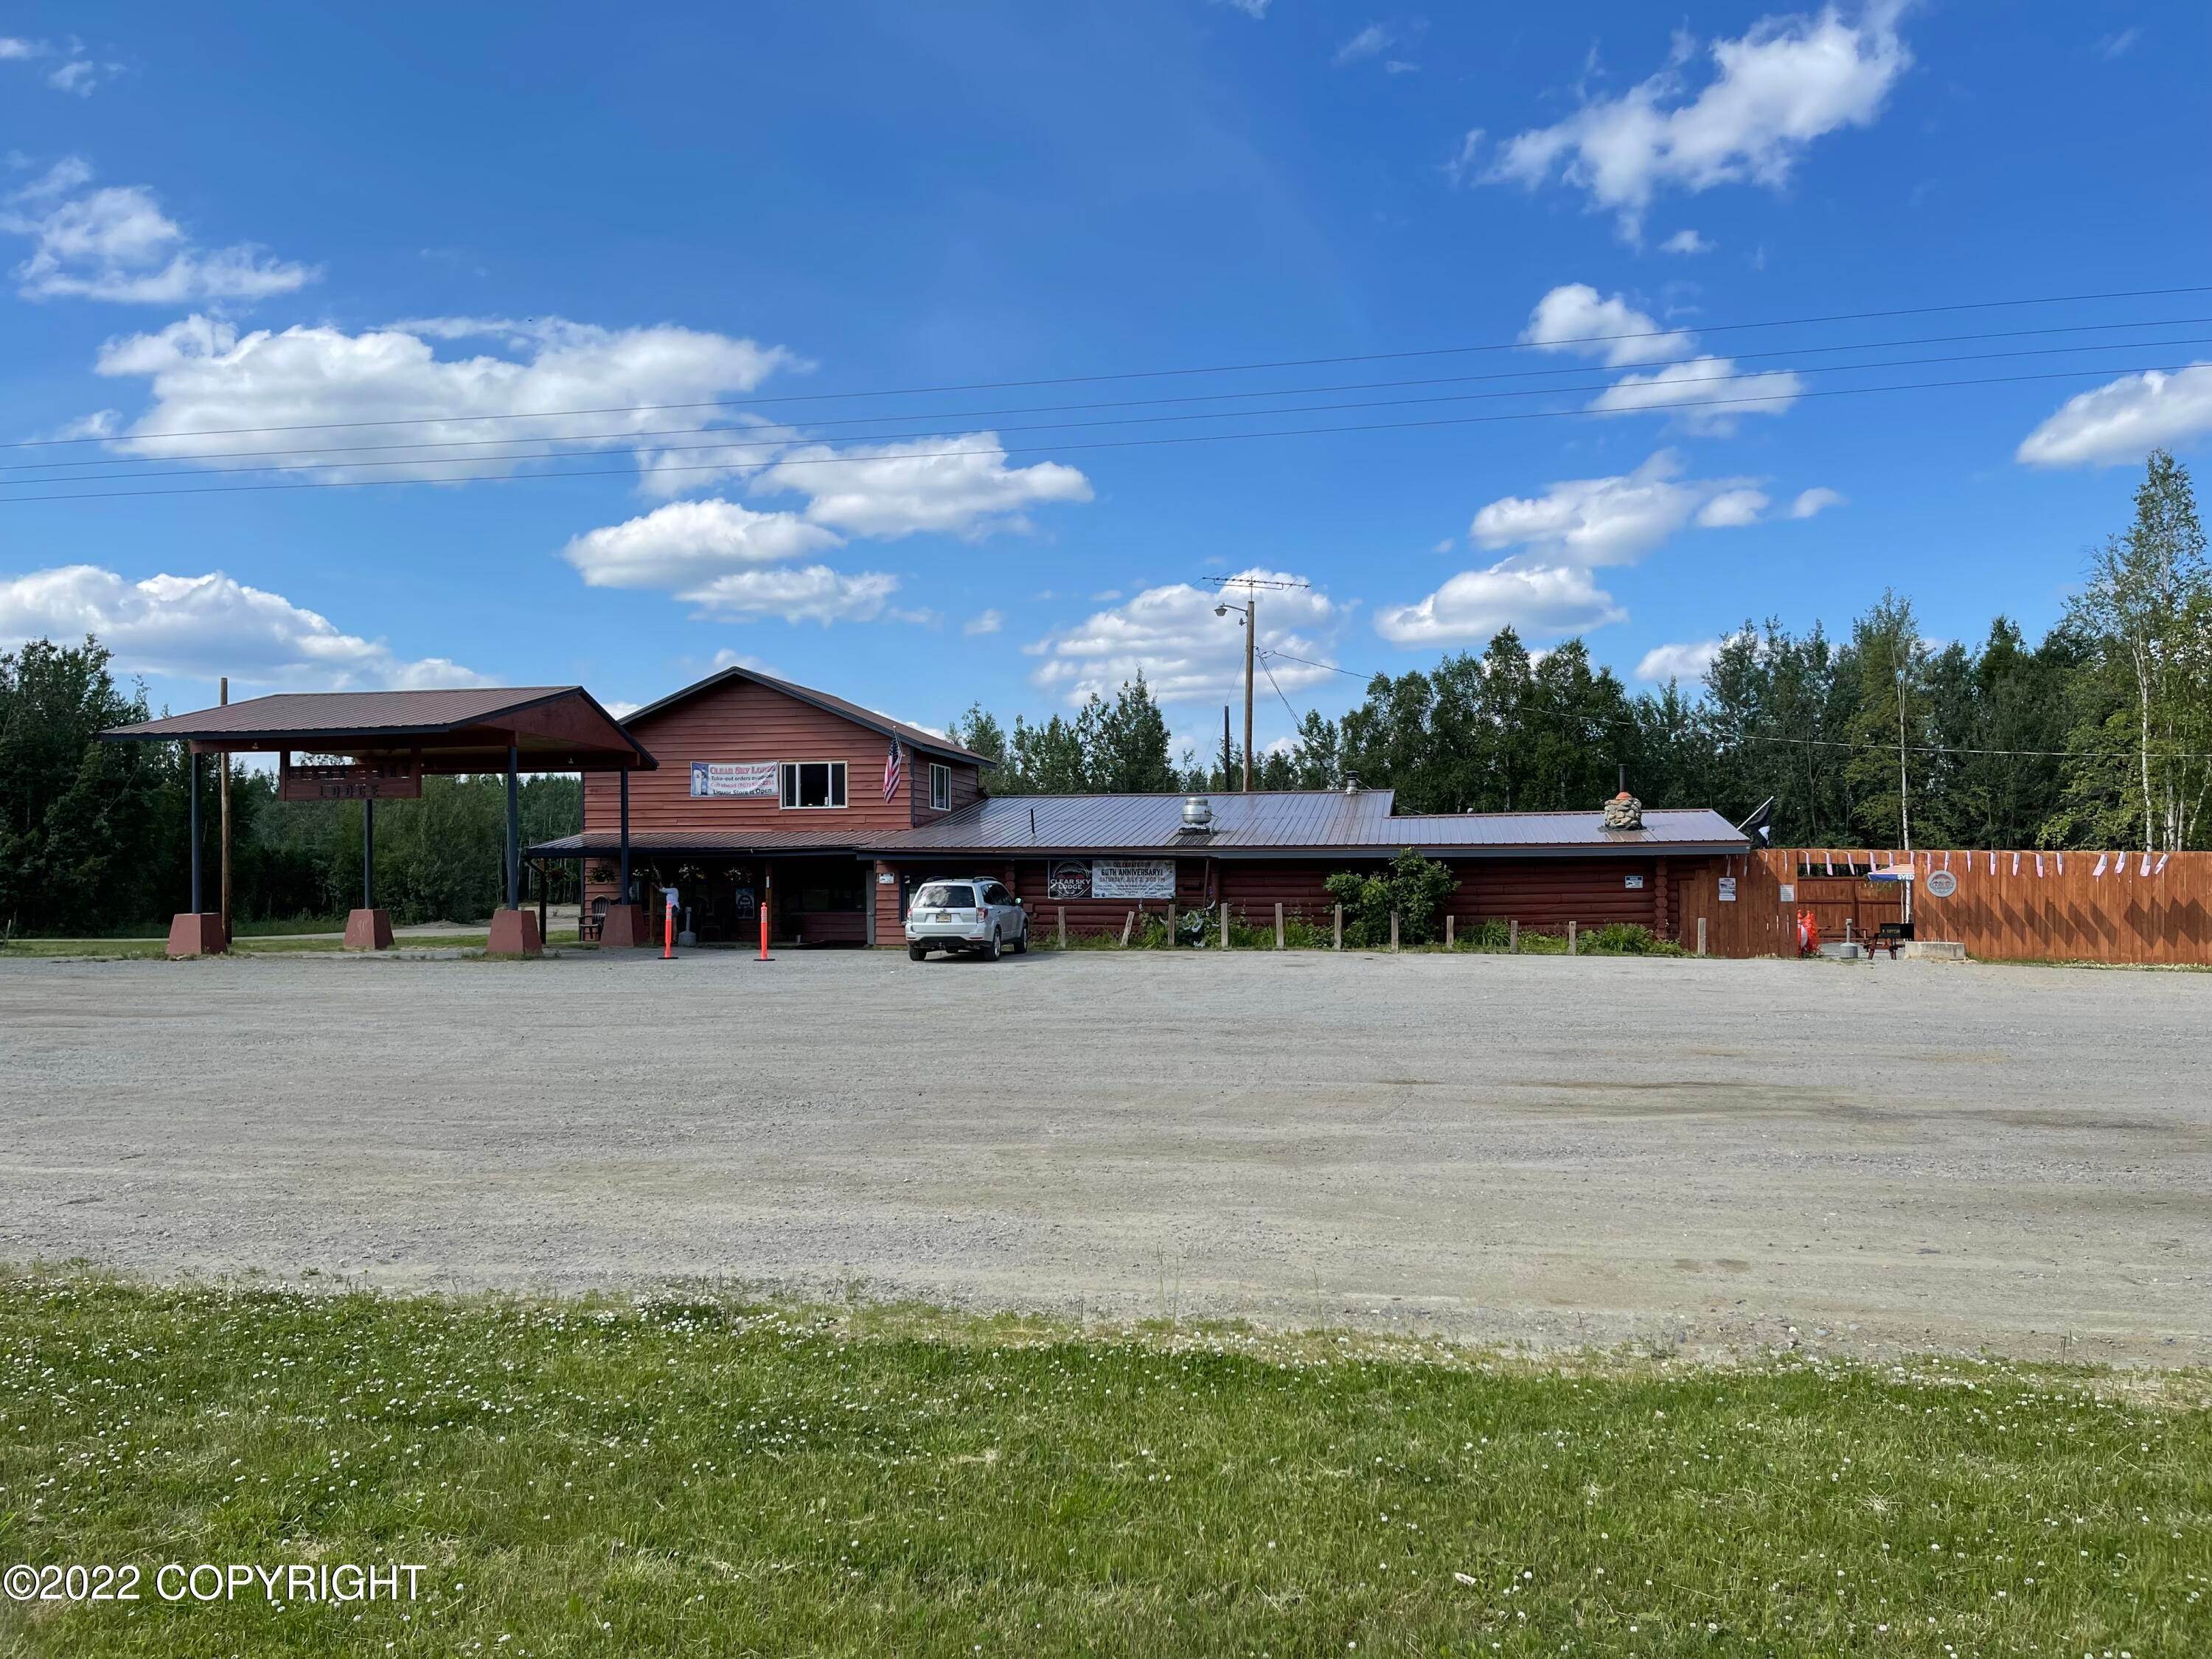 Business Opportunity for Sale at Mile 280 George Parks Highway Clear, Alaska 99704 United States